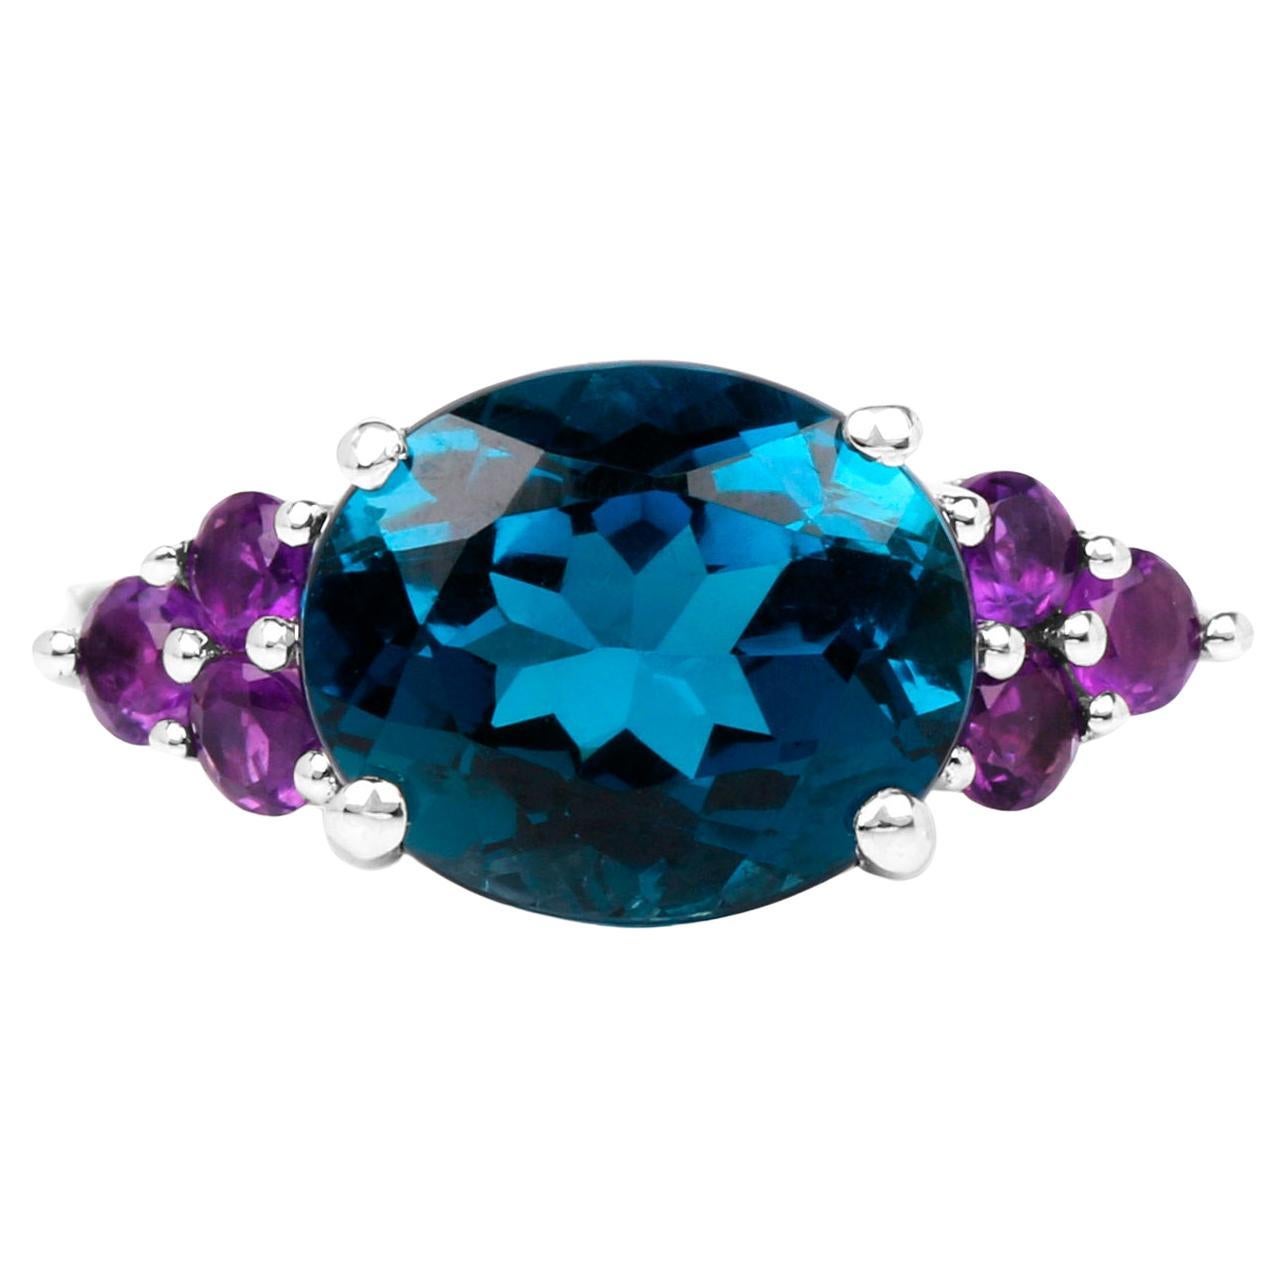 London Blue Topaz Cocktail Ring Amethyst Setting 6.65 Carats